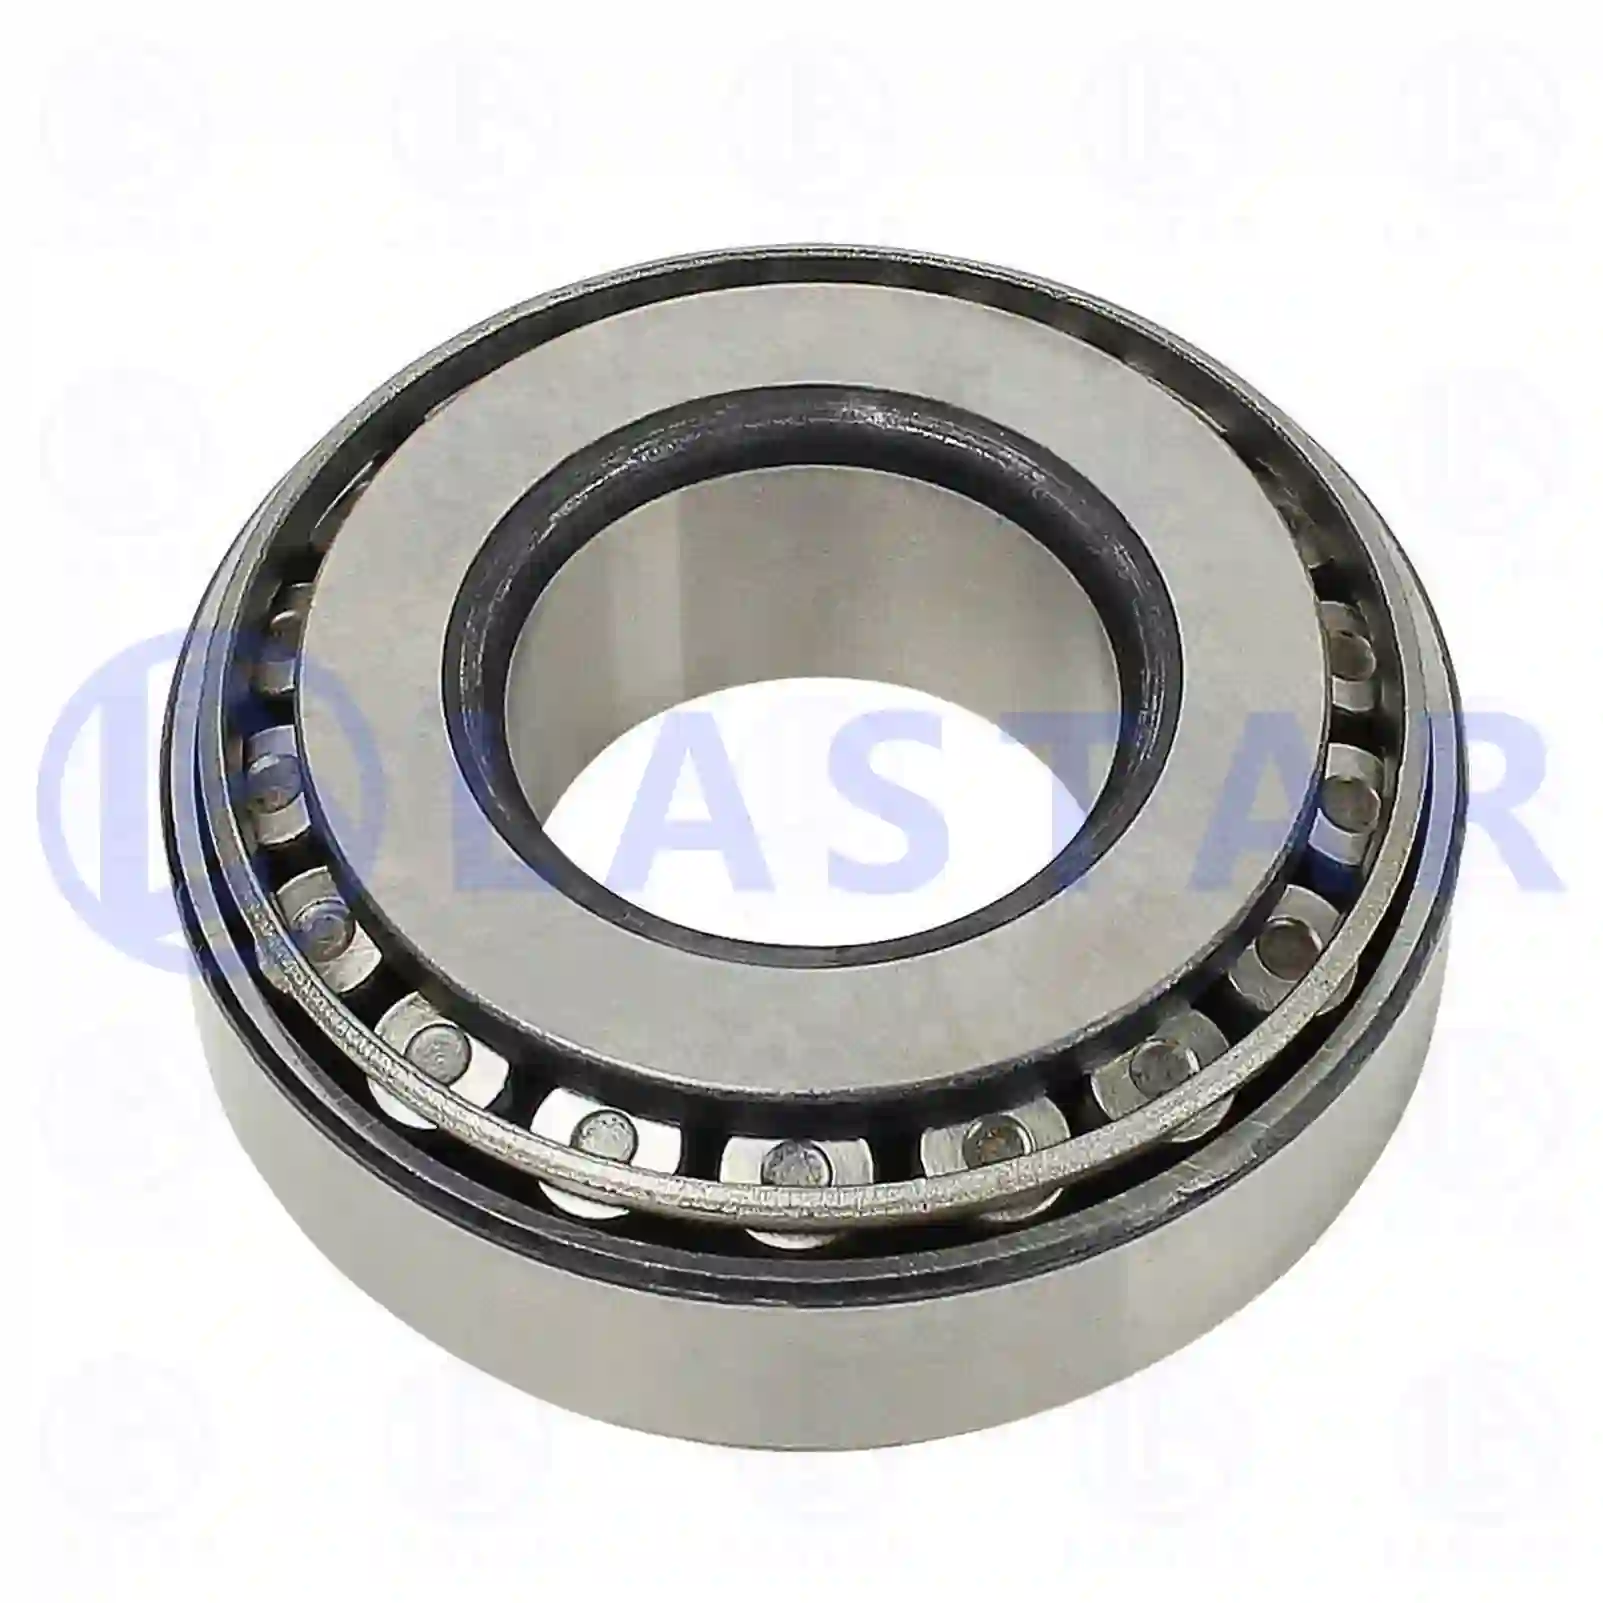 Rear Axle, Complete Tapered roller bearing, la no: 77730851 ,  oem no:8124026, 291525251, 1487681, 4746603, 5135673AA, 1496374, 9413166, 9413168, 01905023, 07162215, 42471125, 607180, 082127141A, 0009816005, 0019806902, 0019810005, 0059812405, 0059812505, 183405, 7183405, 291525251, 7169273 Lastar Spare Part | Truck Spare Parts, Auotomotive Spare Parts